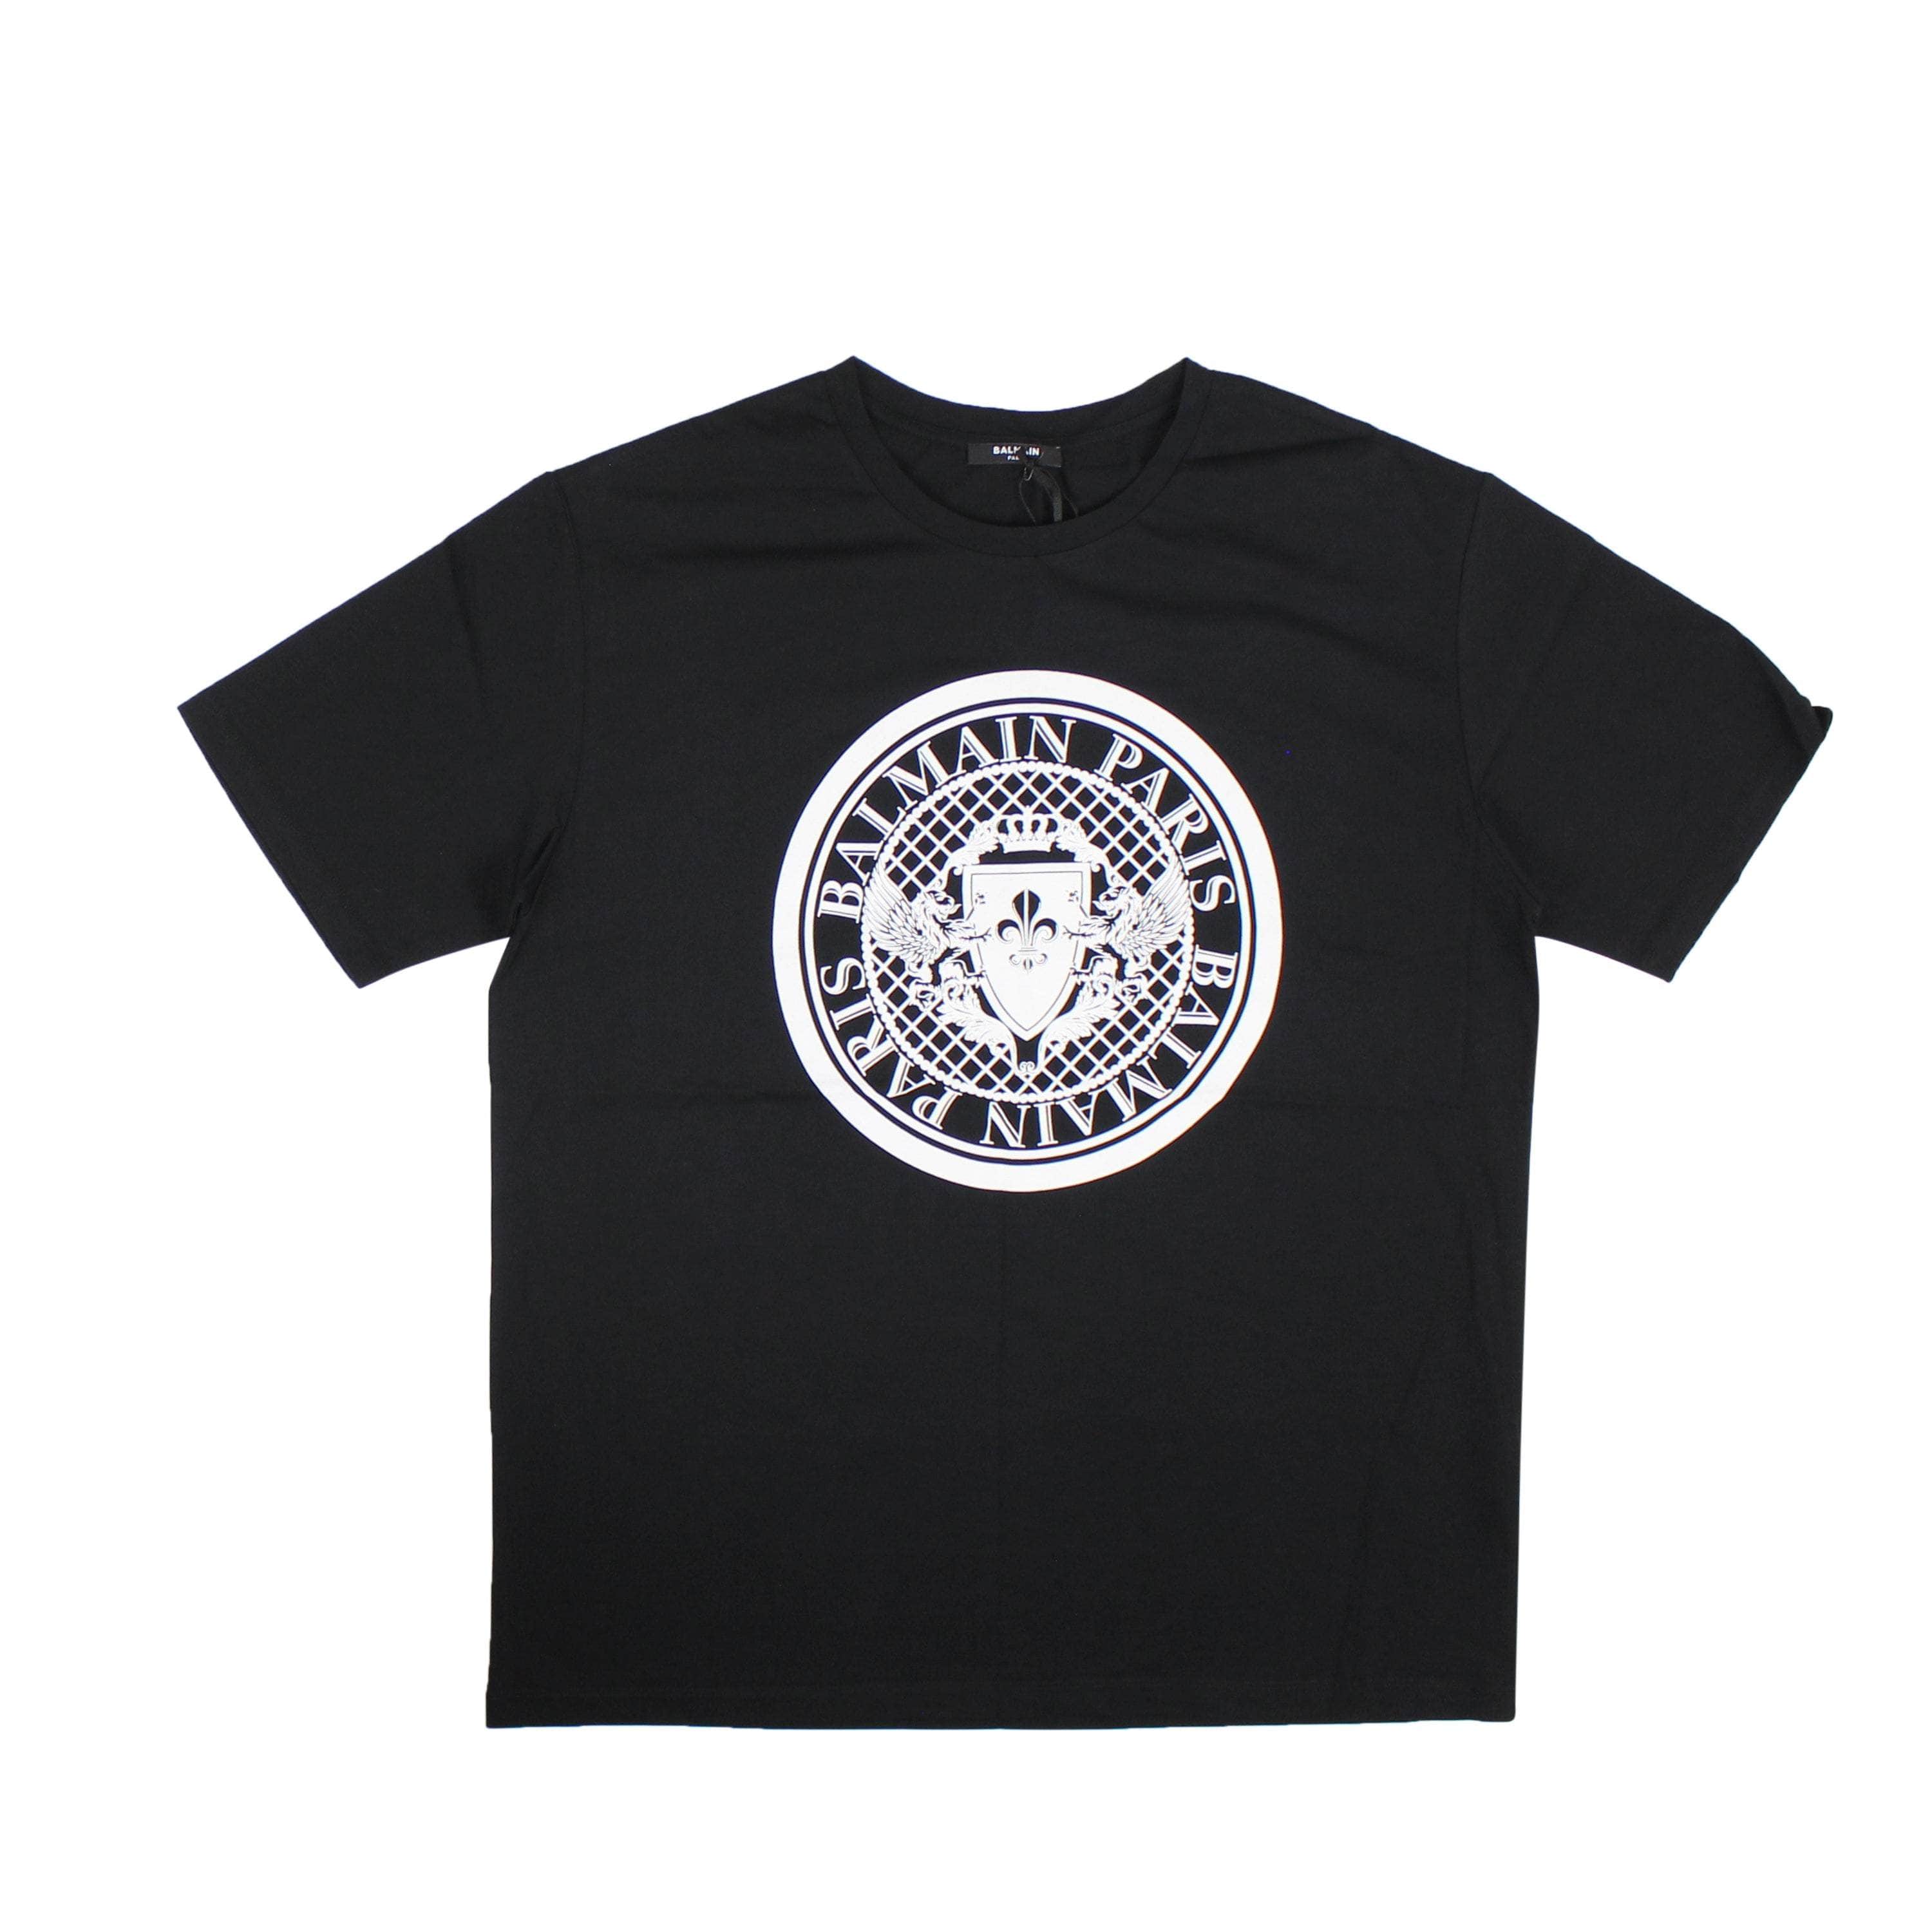 Balmain 250-500, channelenable-all, chicmi, couponcollection, main-clothing, shop375, Stadium Goods Black Coin T-Shirt